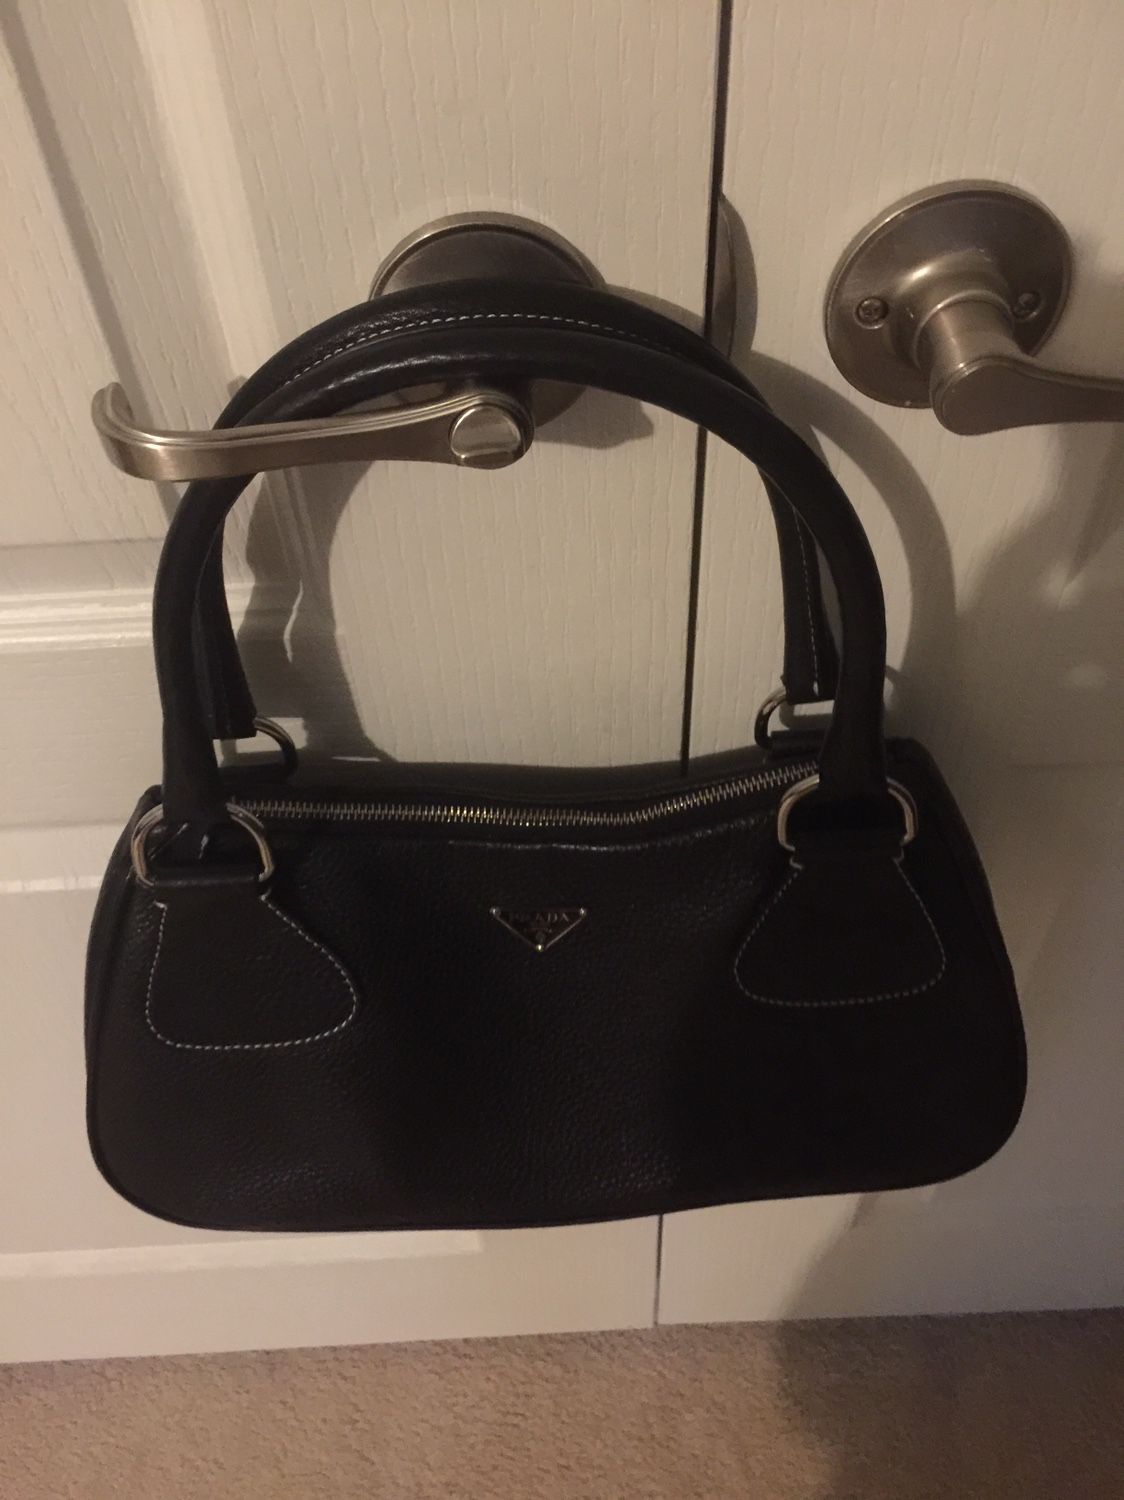 Prada Authentic  Leather Handbag  In Black  Comes With A Dust Bag 